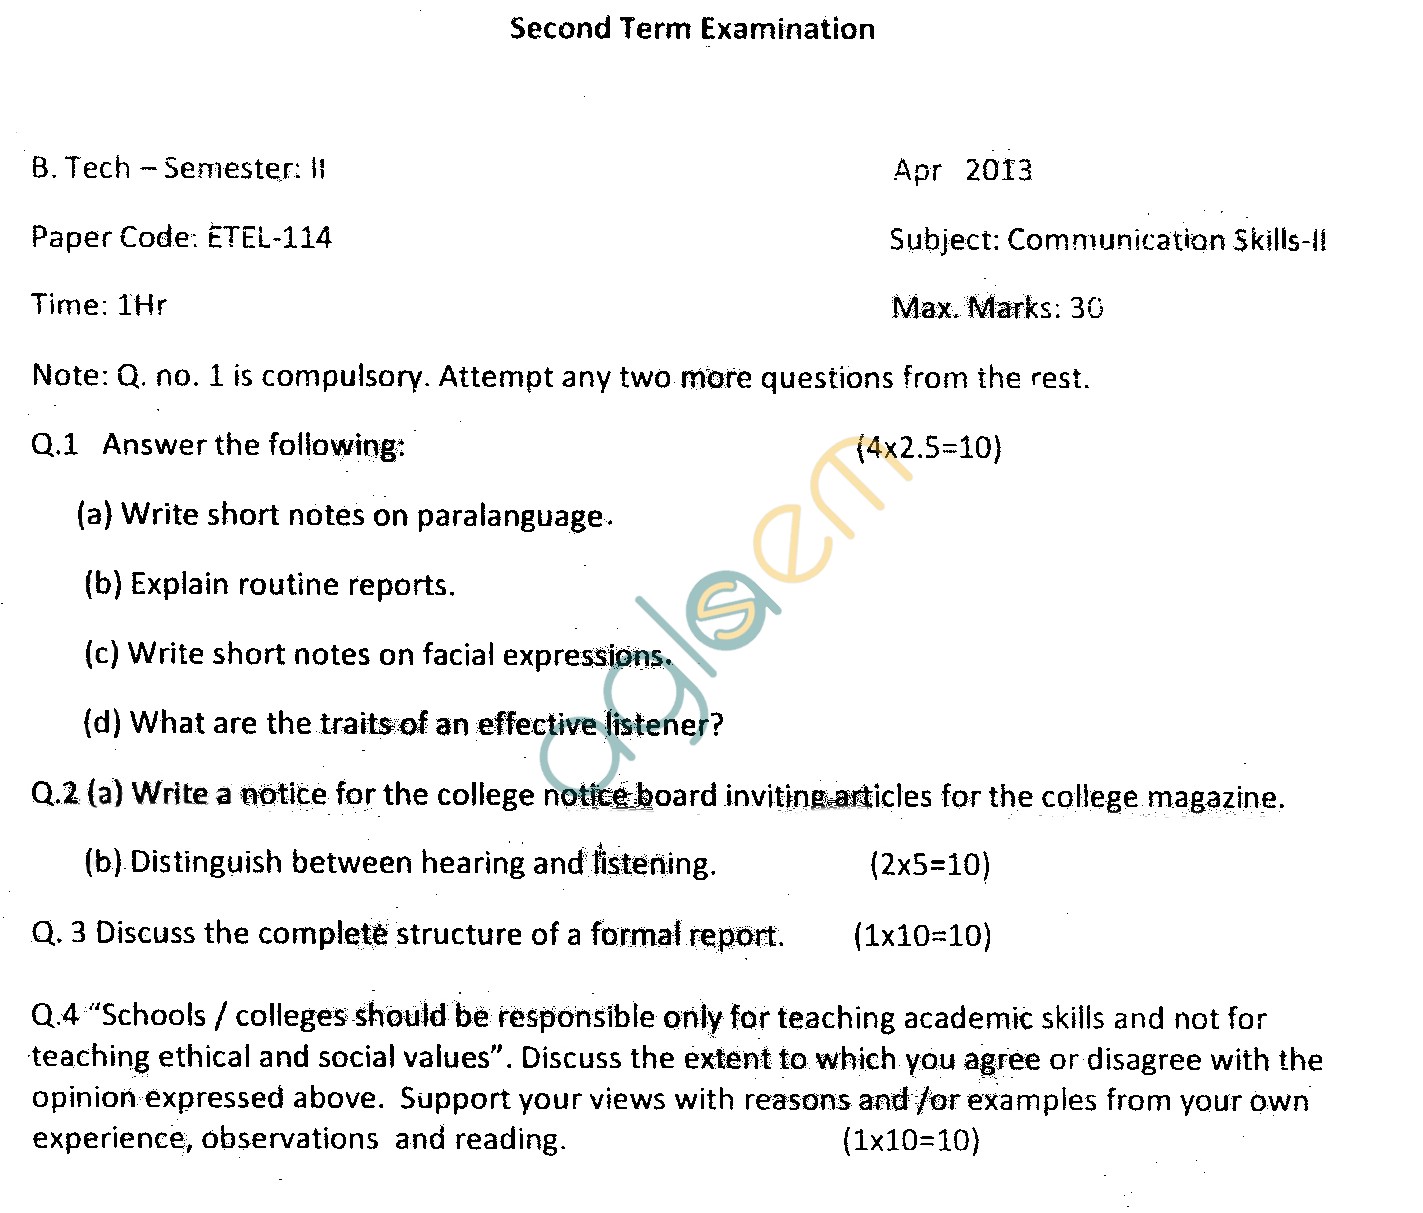 GGSIPU Question Papers Second Semester  Second Term 2013  ETEL-114